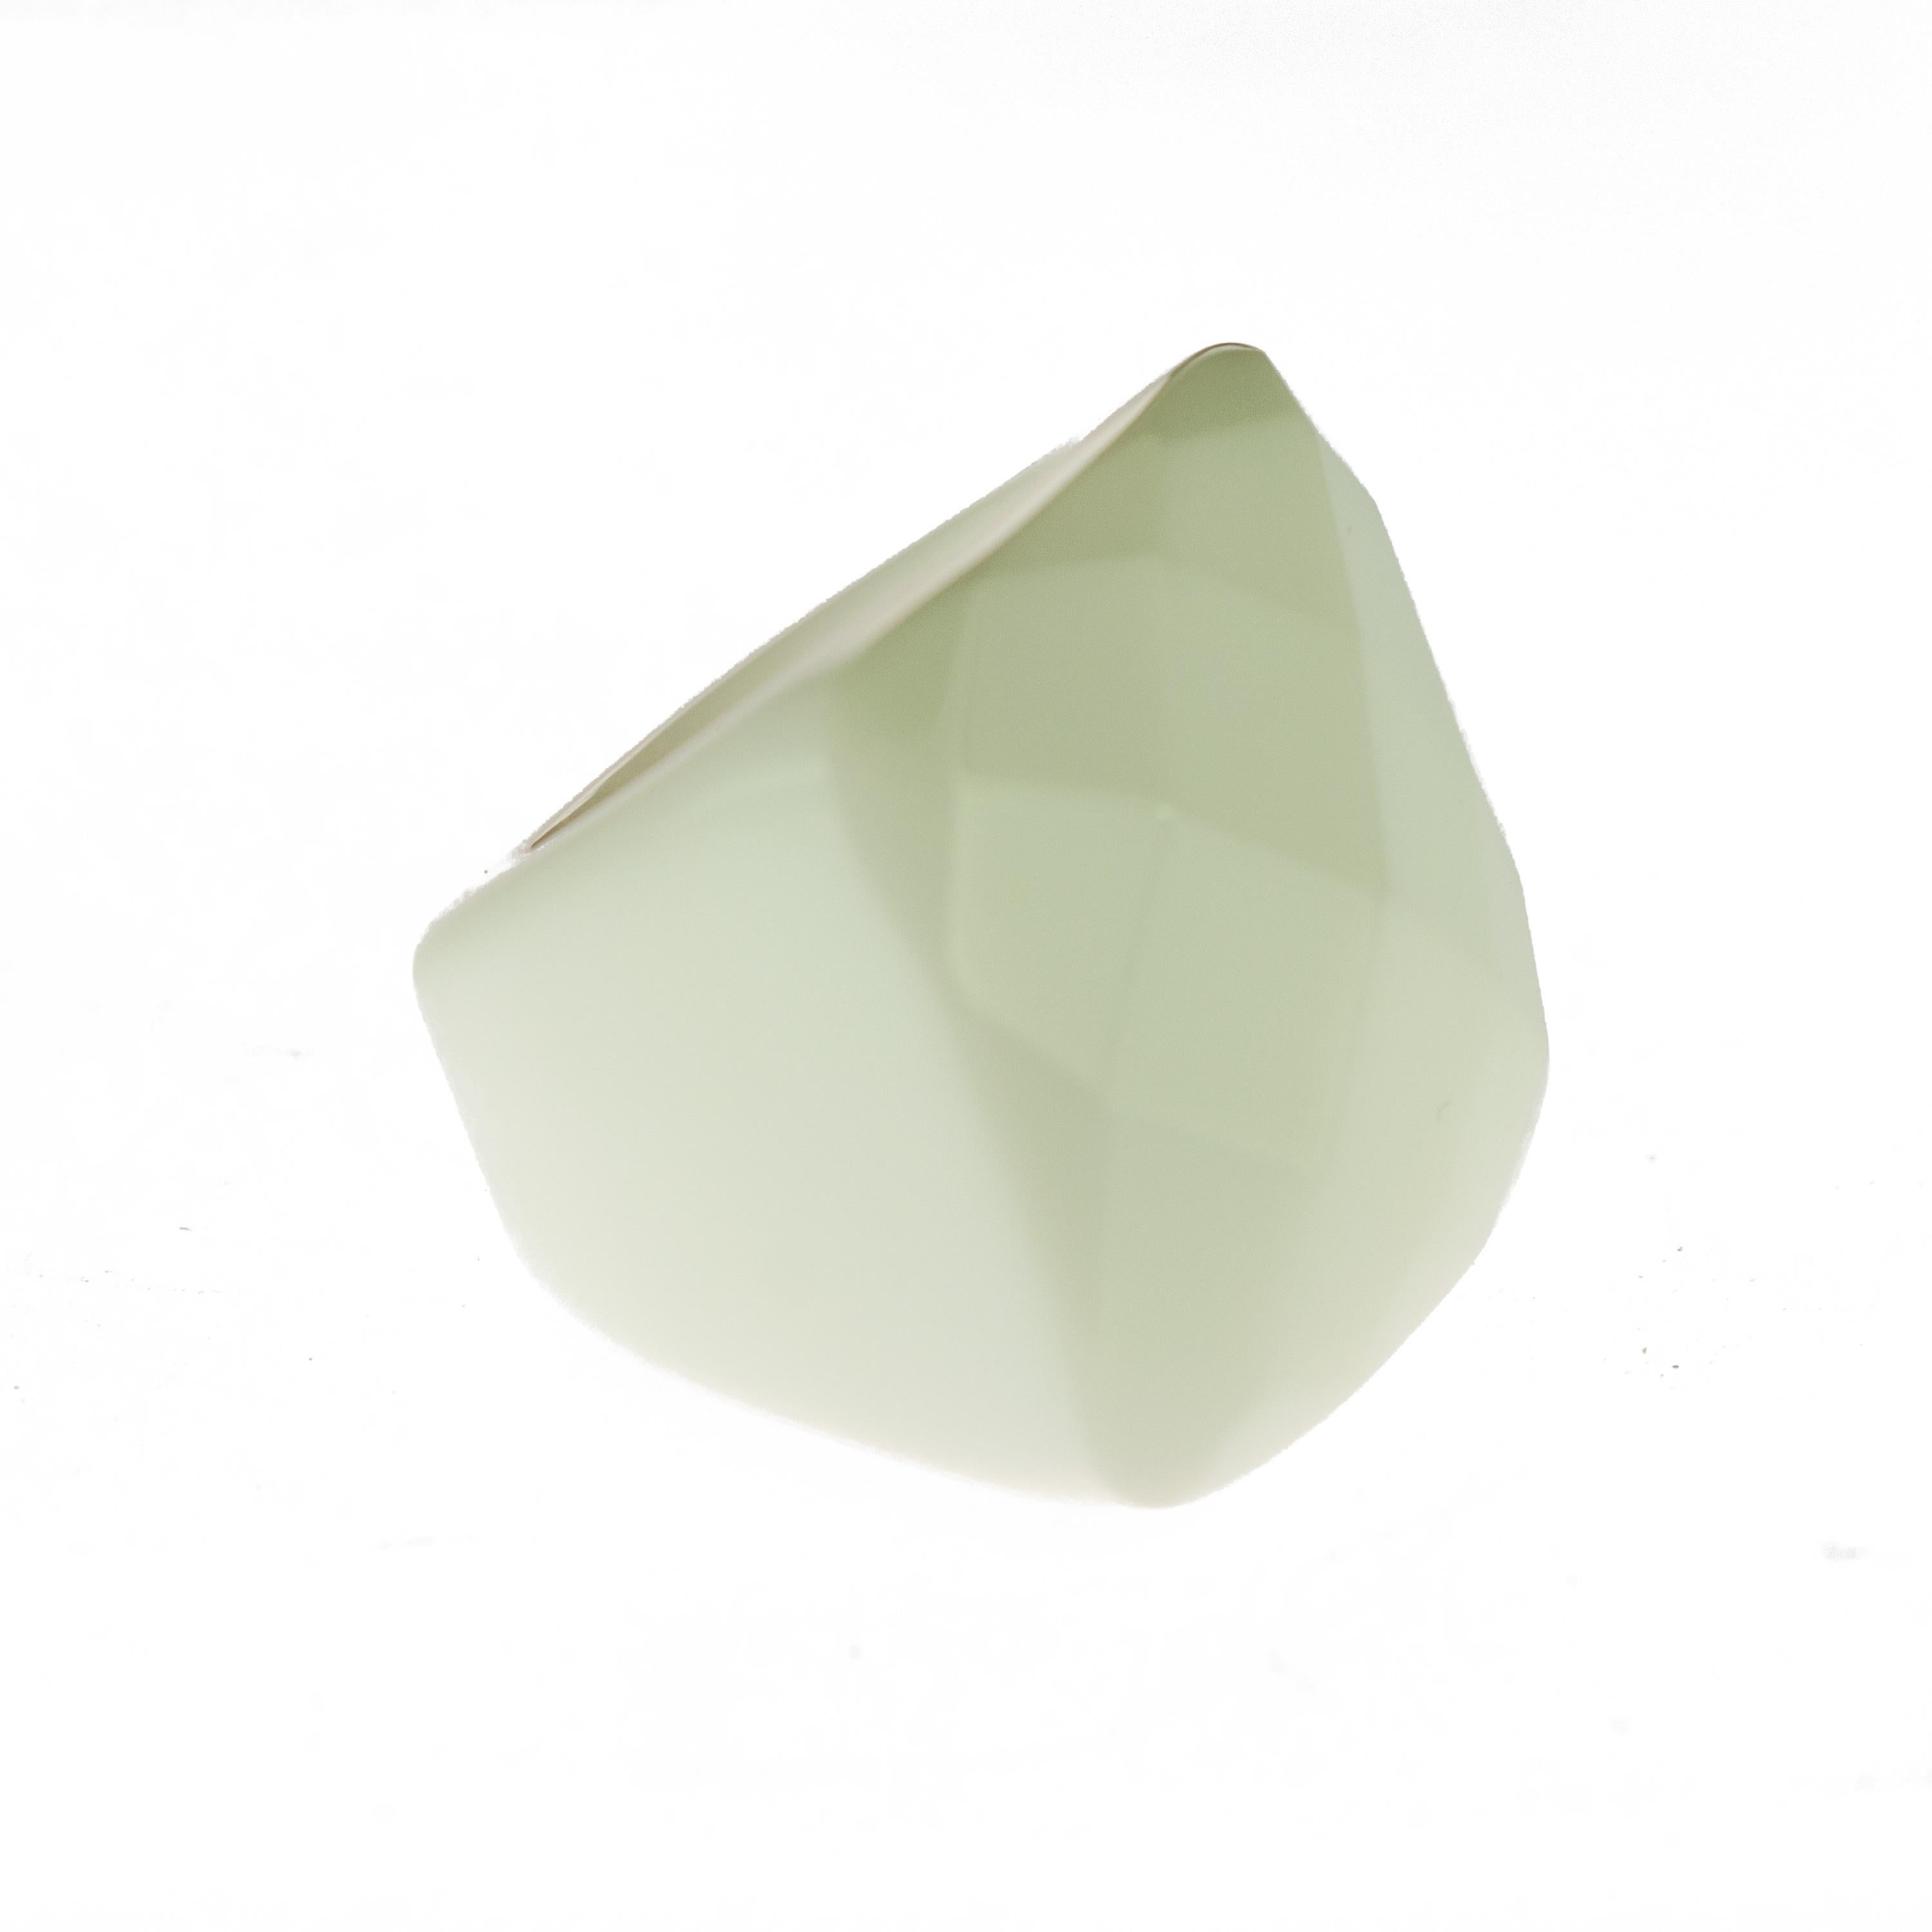 bullet?
Delight yourself with a luminous handmade jewelry, a white agate ring perfect for an enigmatic night. A modern piece full of light and luxury. A simple touch of elegance that will decorate your hand with glamour and uniqueness. A pyramid and